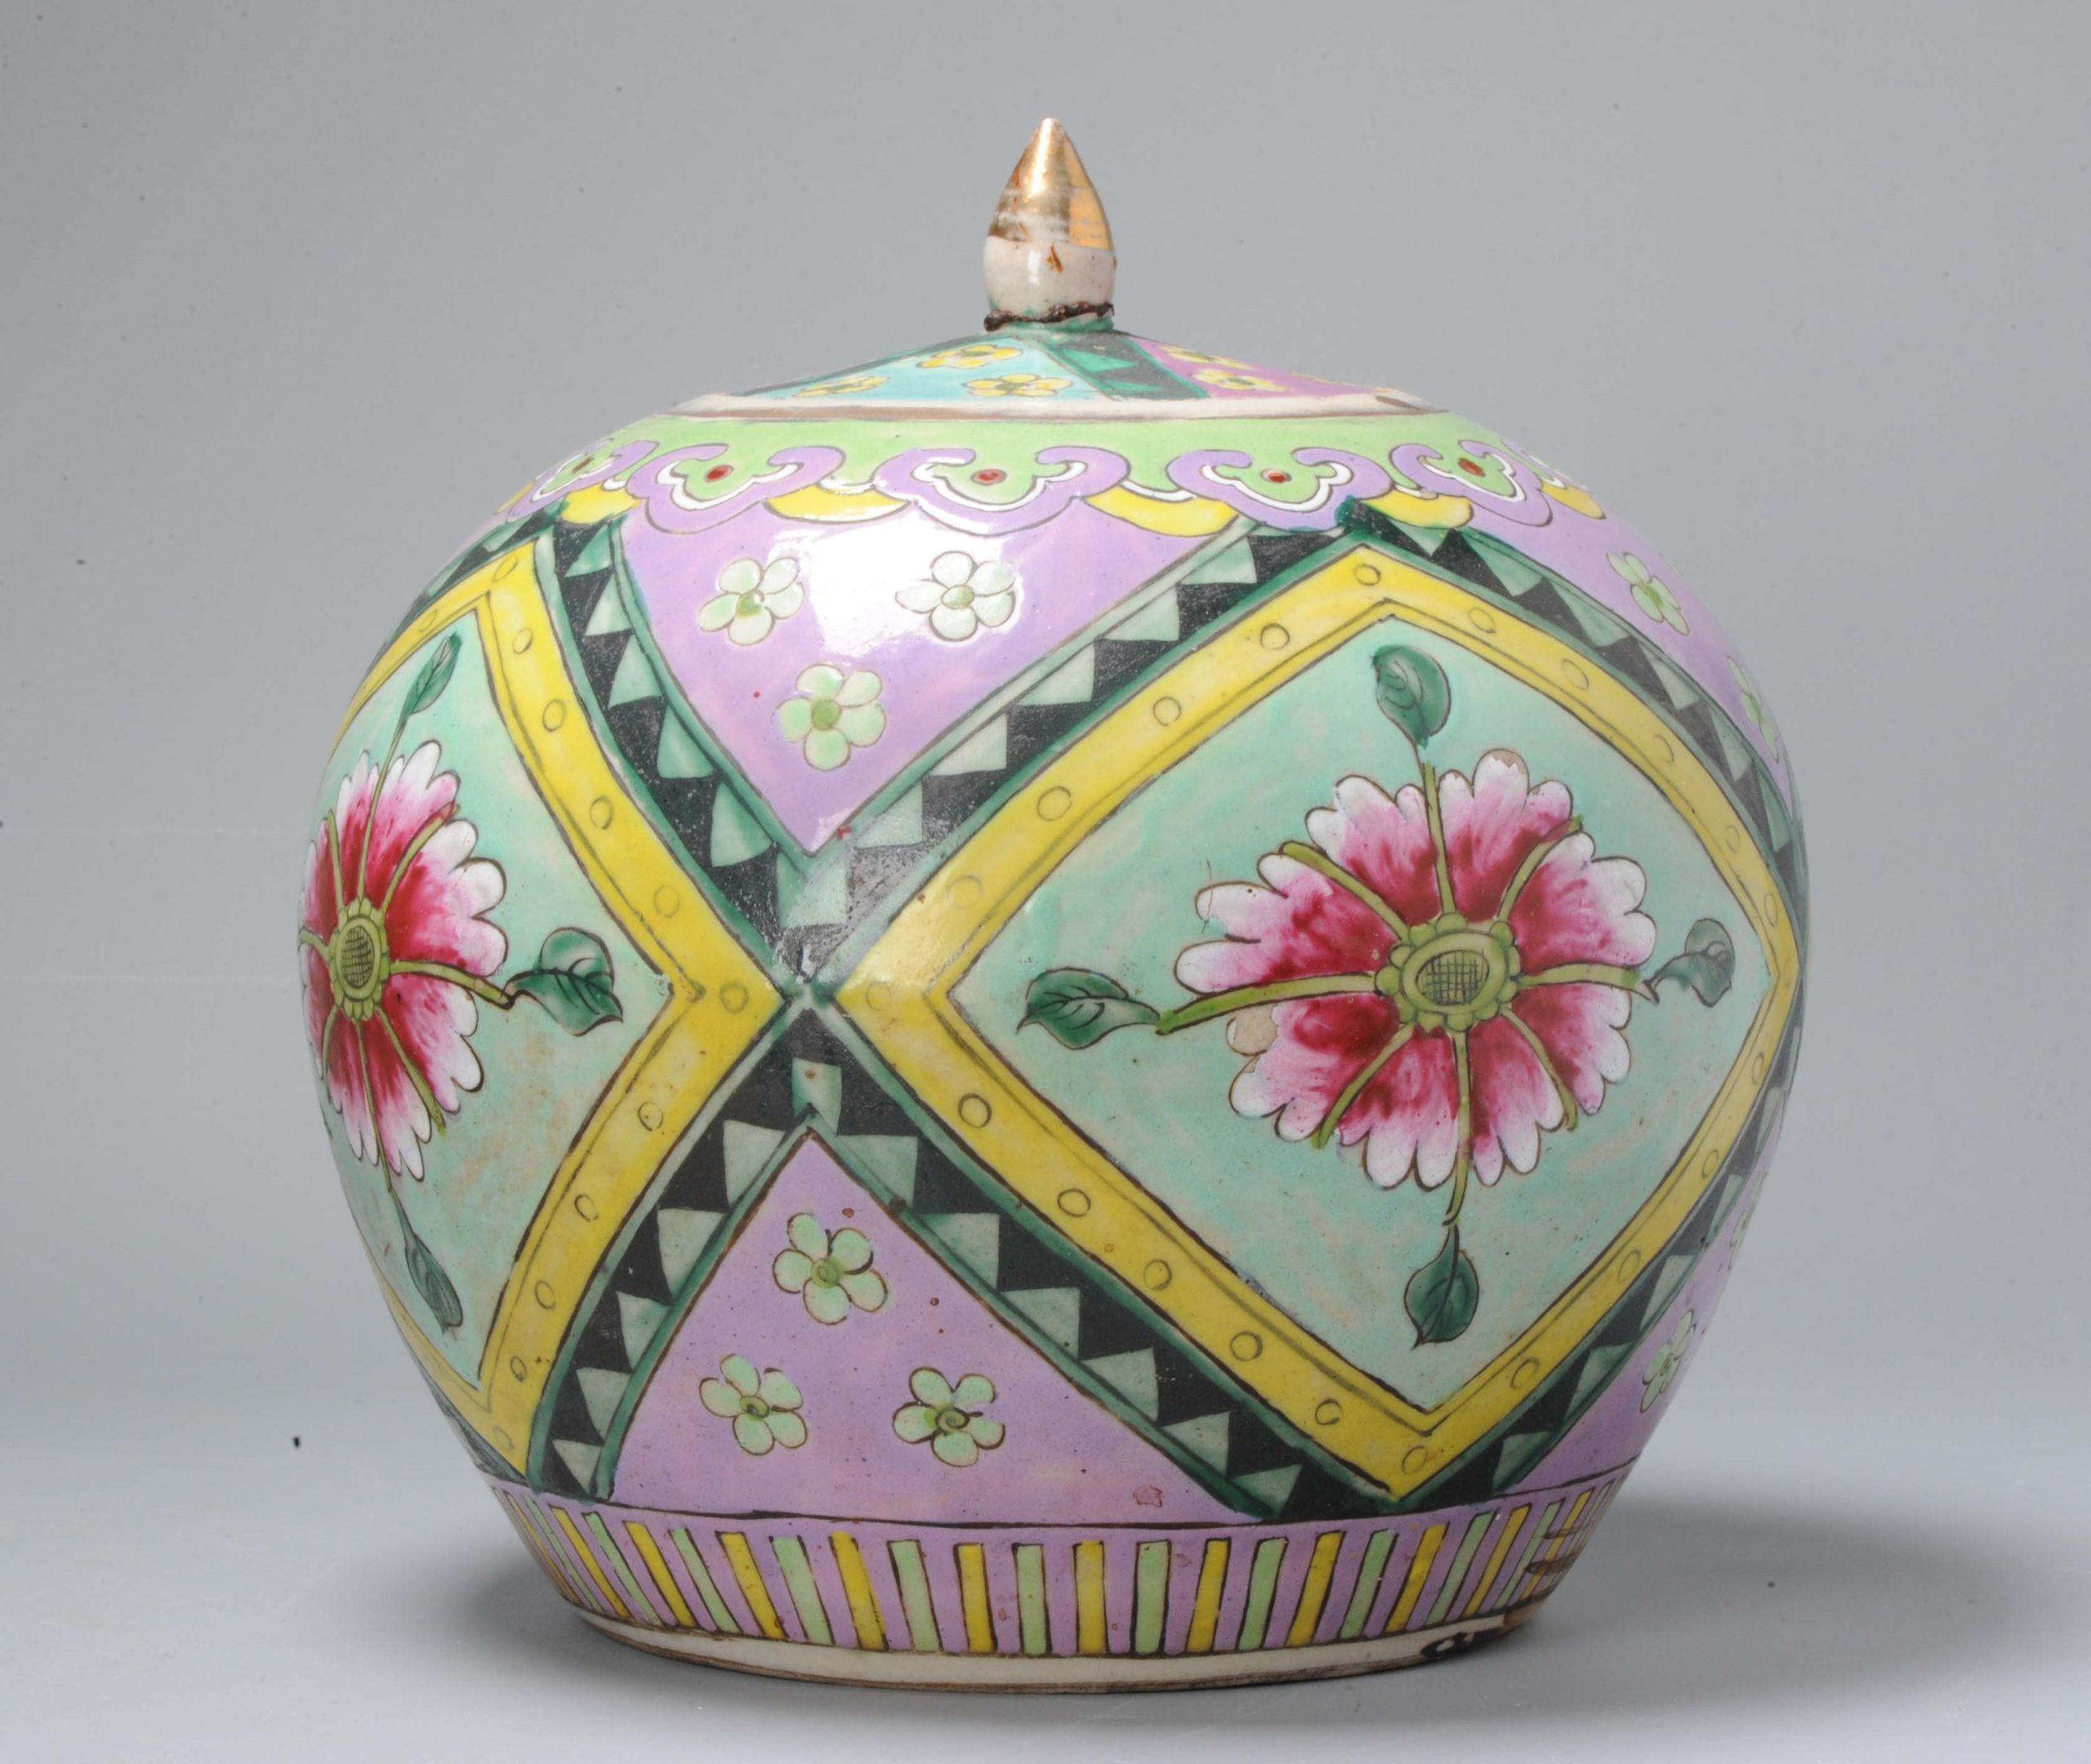 Lovely Chinese Porcelain Bencharong Jar

When Bencharong (Benjarong) is used to refer to porcelain it usually means a type of 18th and 19th centuries Chinese polychrome enameled 'five colored' wares, made in Jingdezhen to Thai (Siamese)